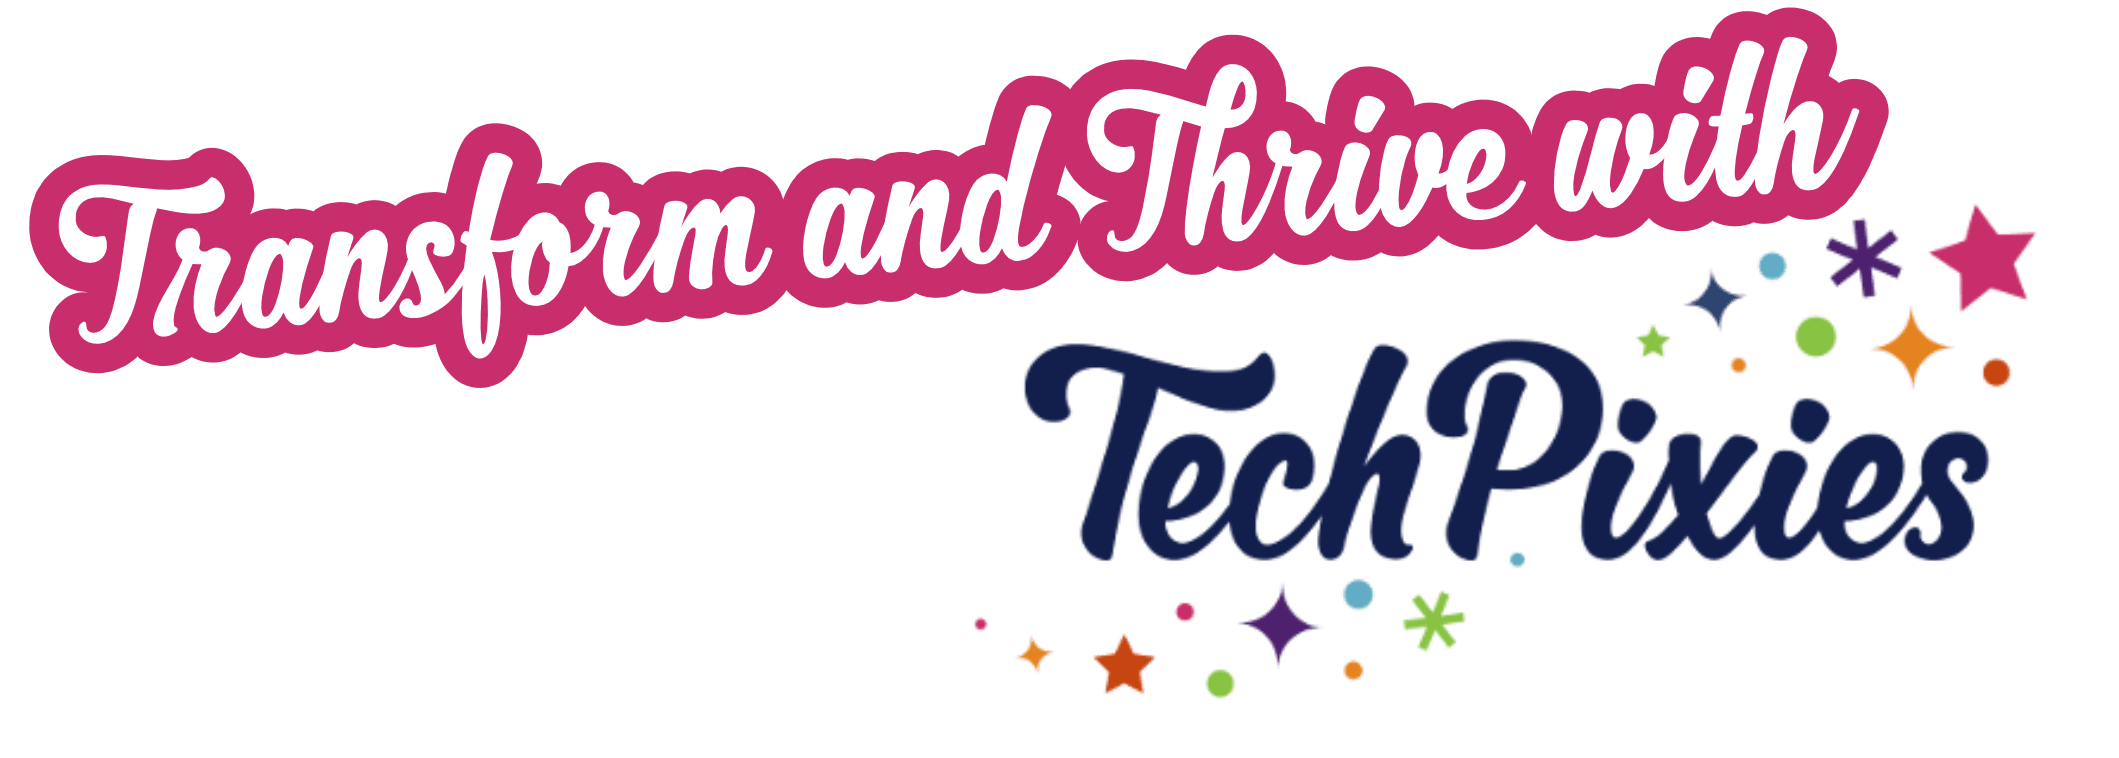 Transform and thrive with techpixies